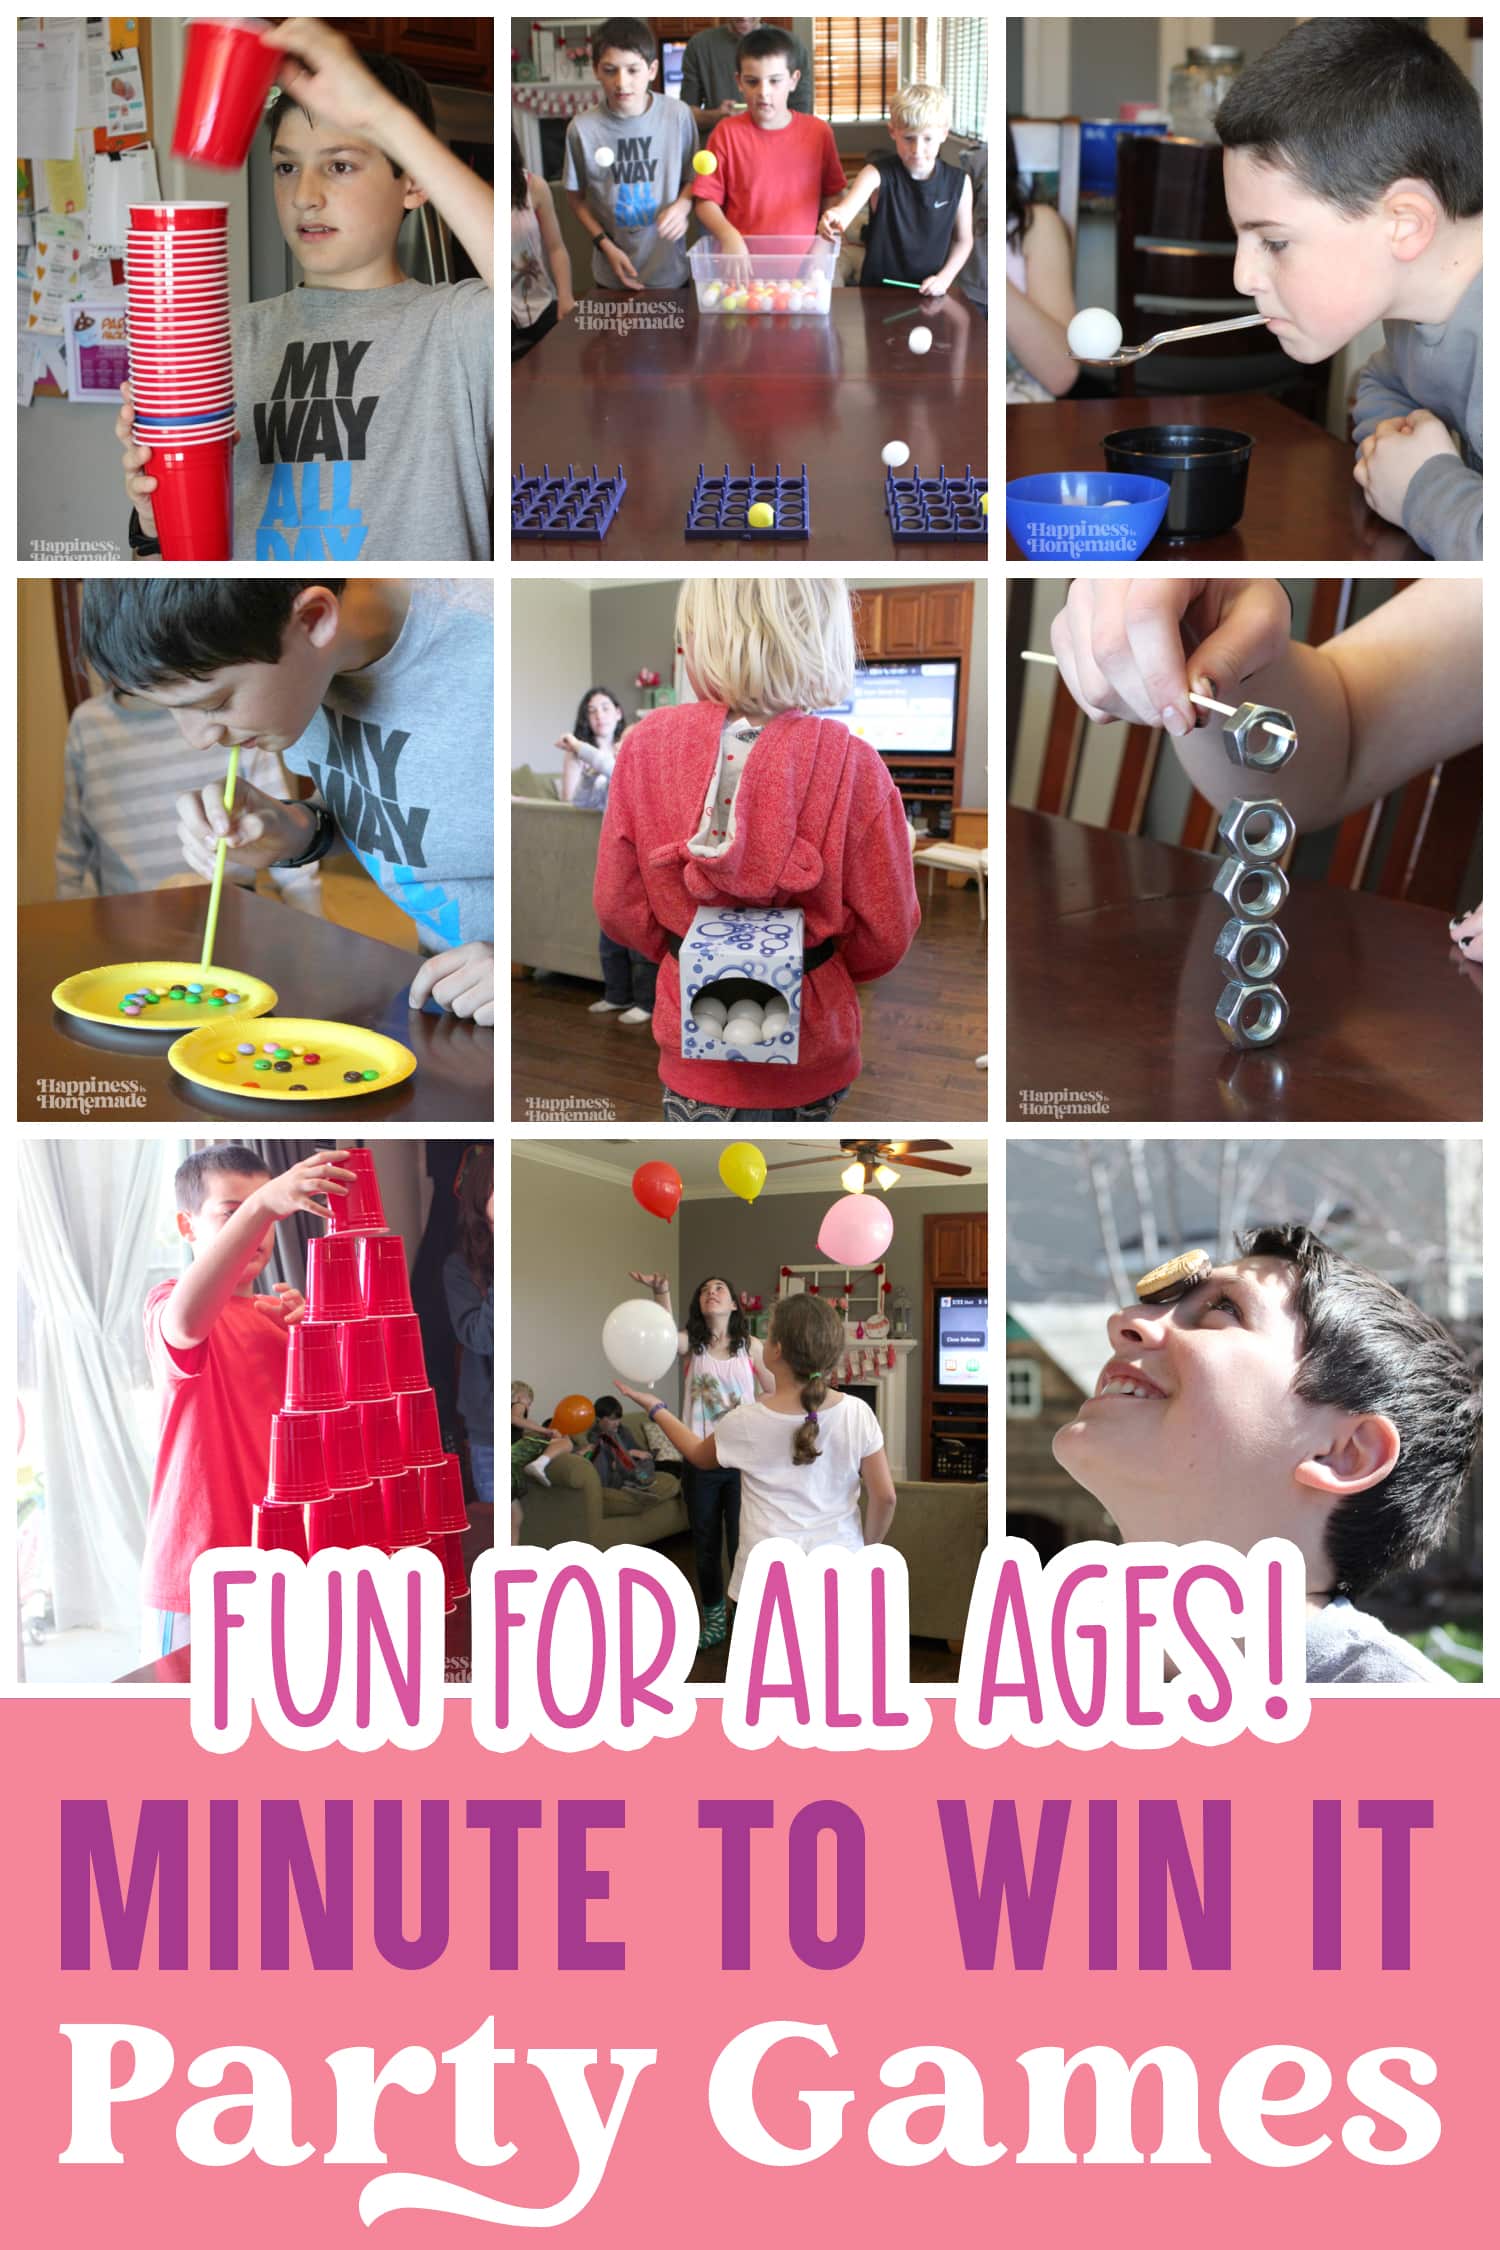 \"Fun for all ages, Minute-to-win-it Party Games pin graphic